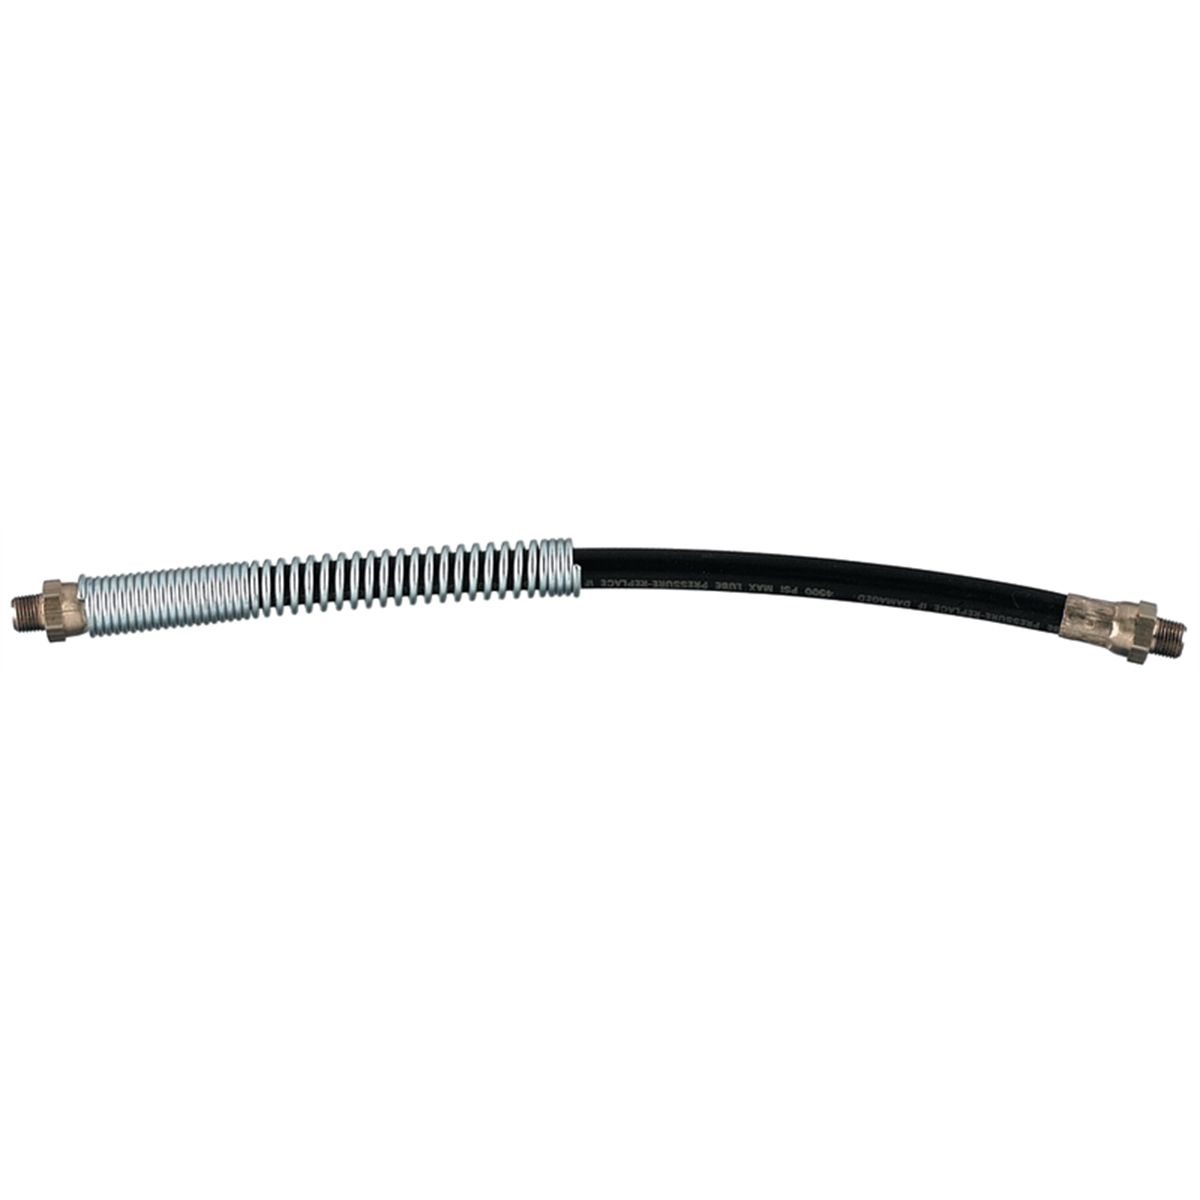 ET LIN5818 Lincoln Whip Hose Extension w/ Spring Guard (18", 1/8" MNPT)